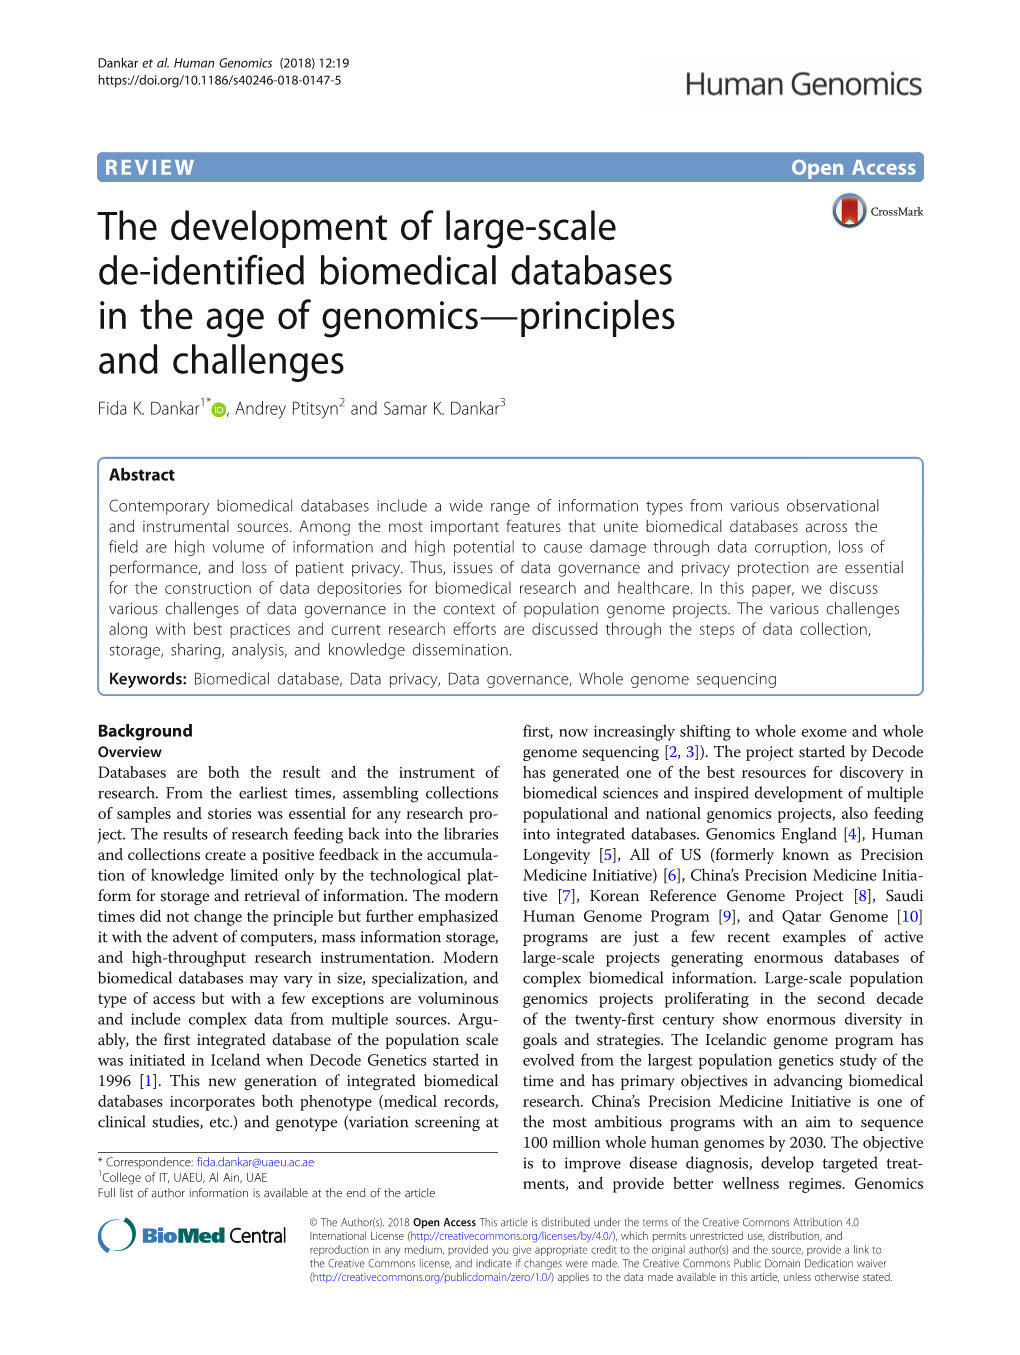 The Development of Large-Scale De-Identified Biomedical Databases in the Age of Genomics—Principles and Challenges Fida K